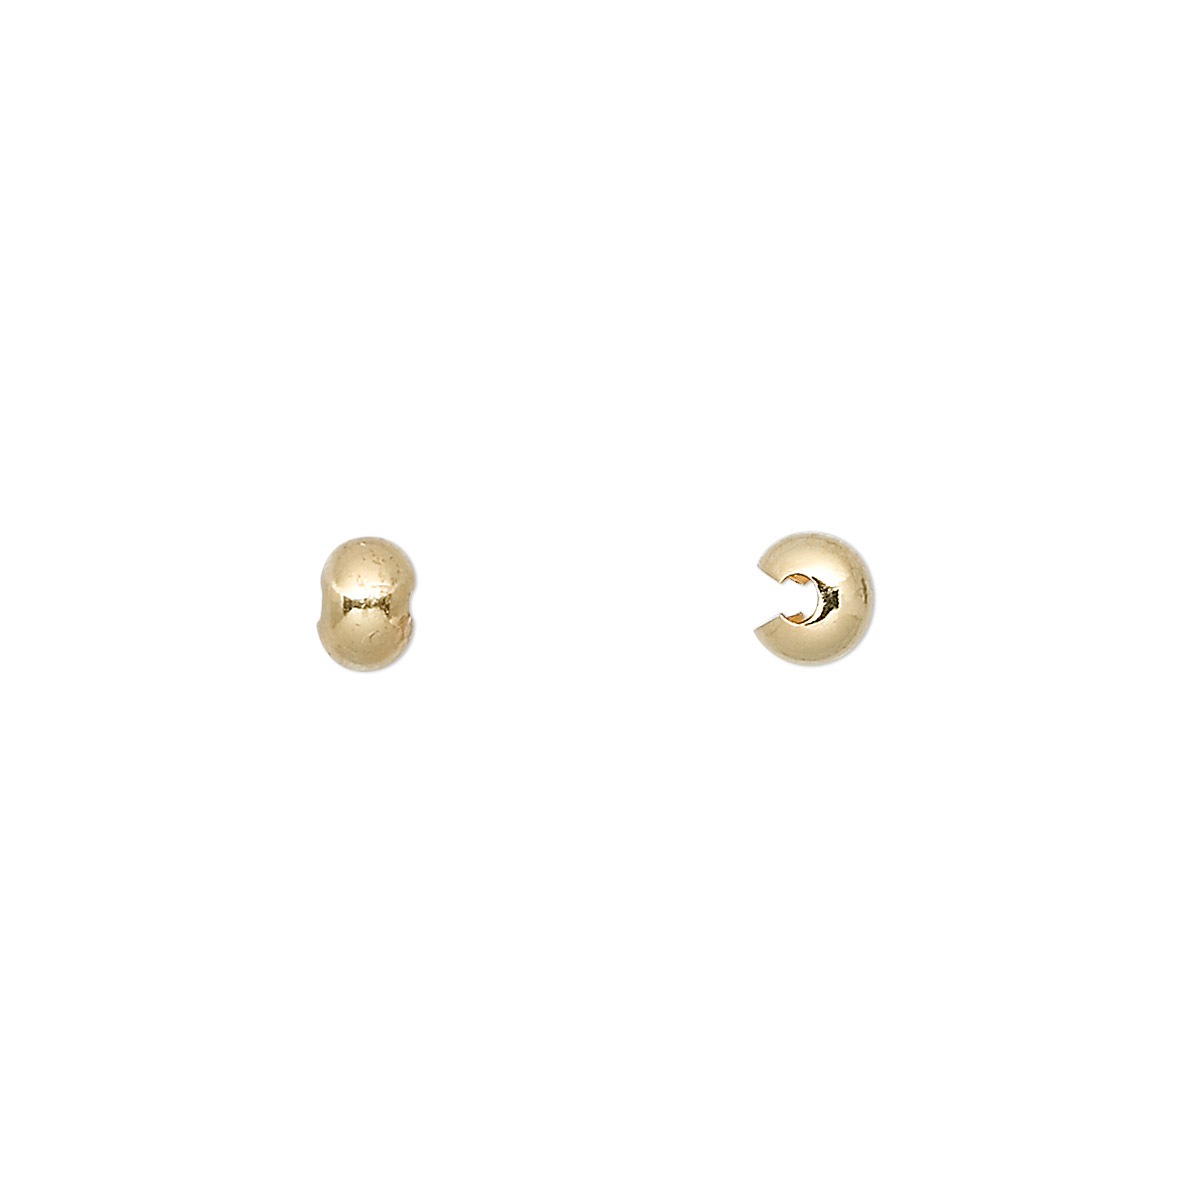 Crimp cover, gold-plated brass, 4mm round. Sold per pkg of 100. - Fire ...